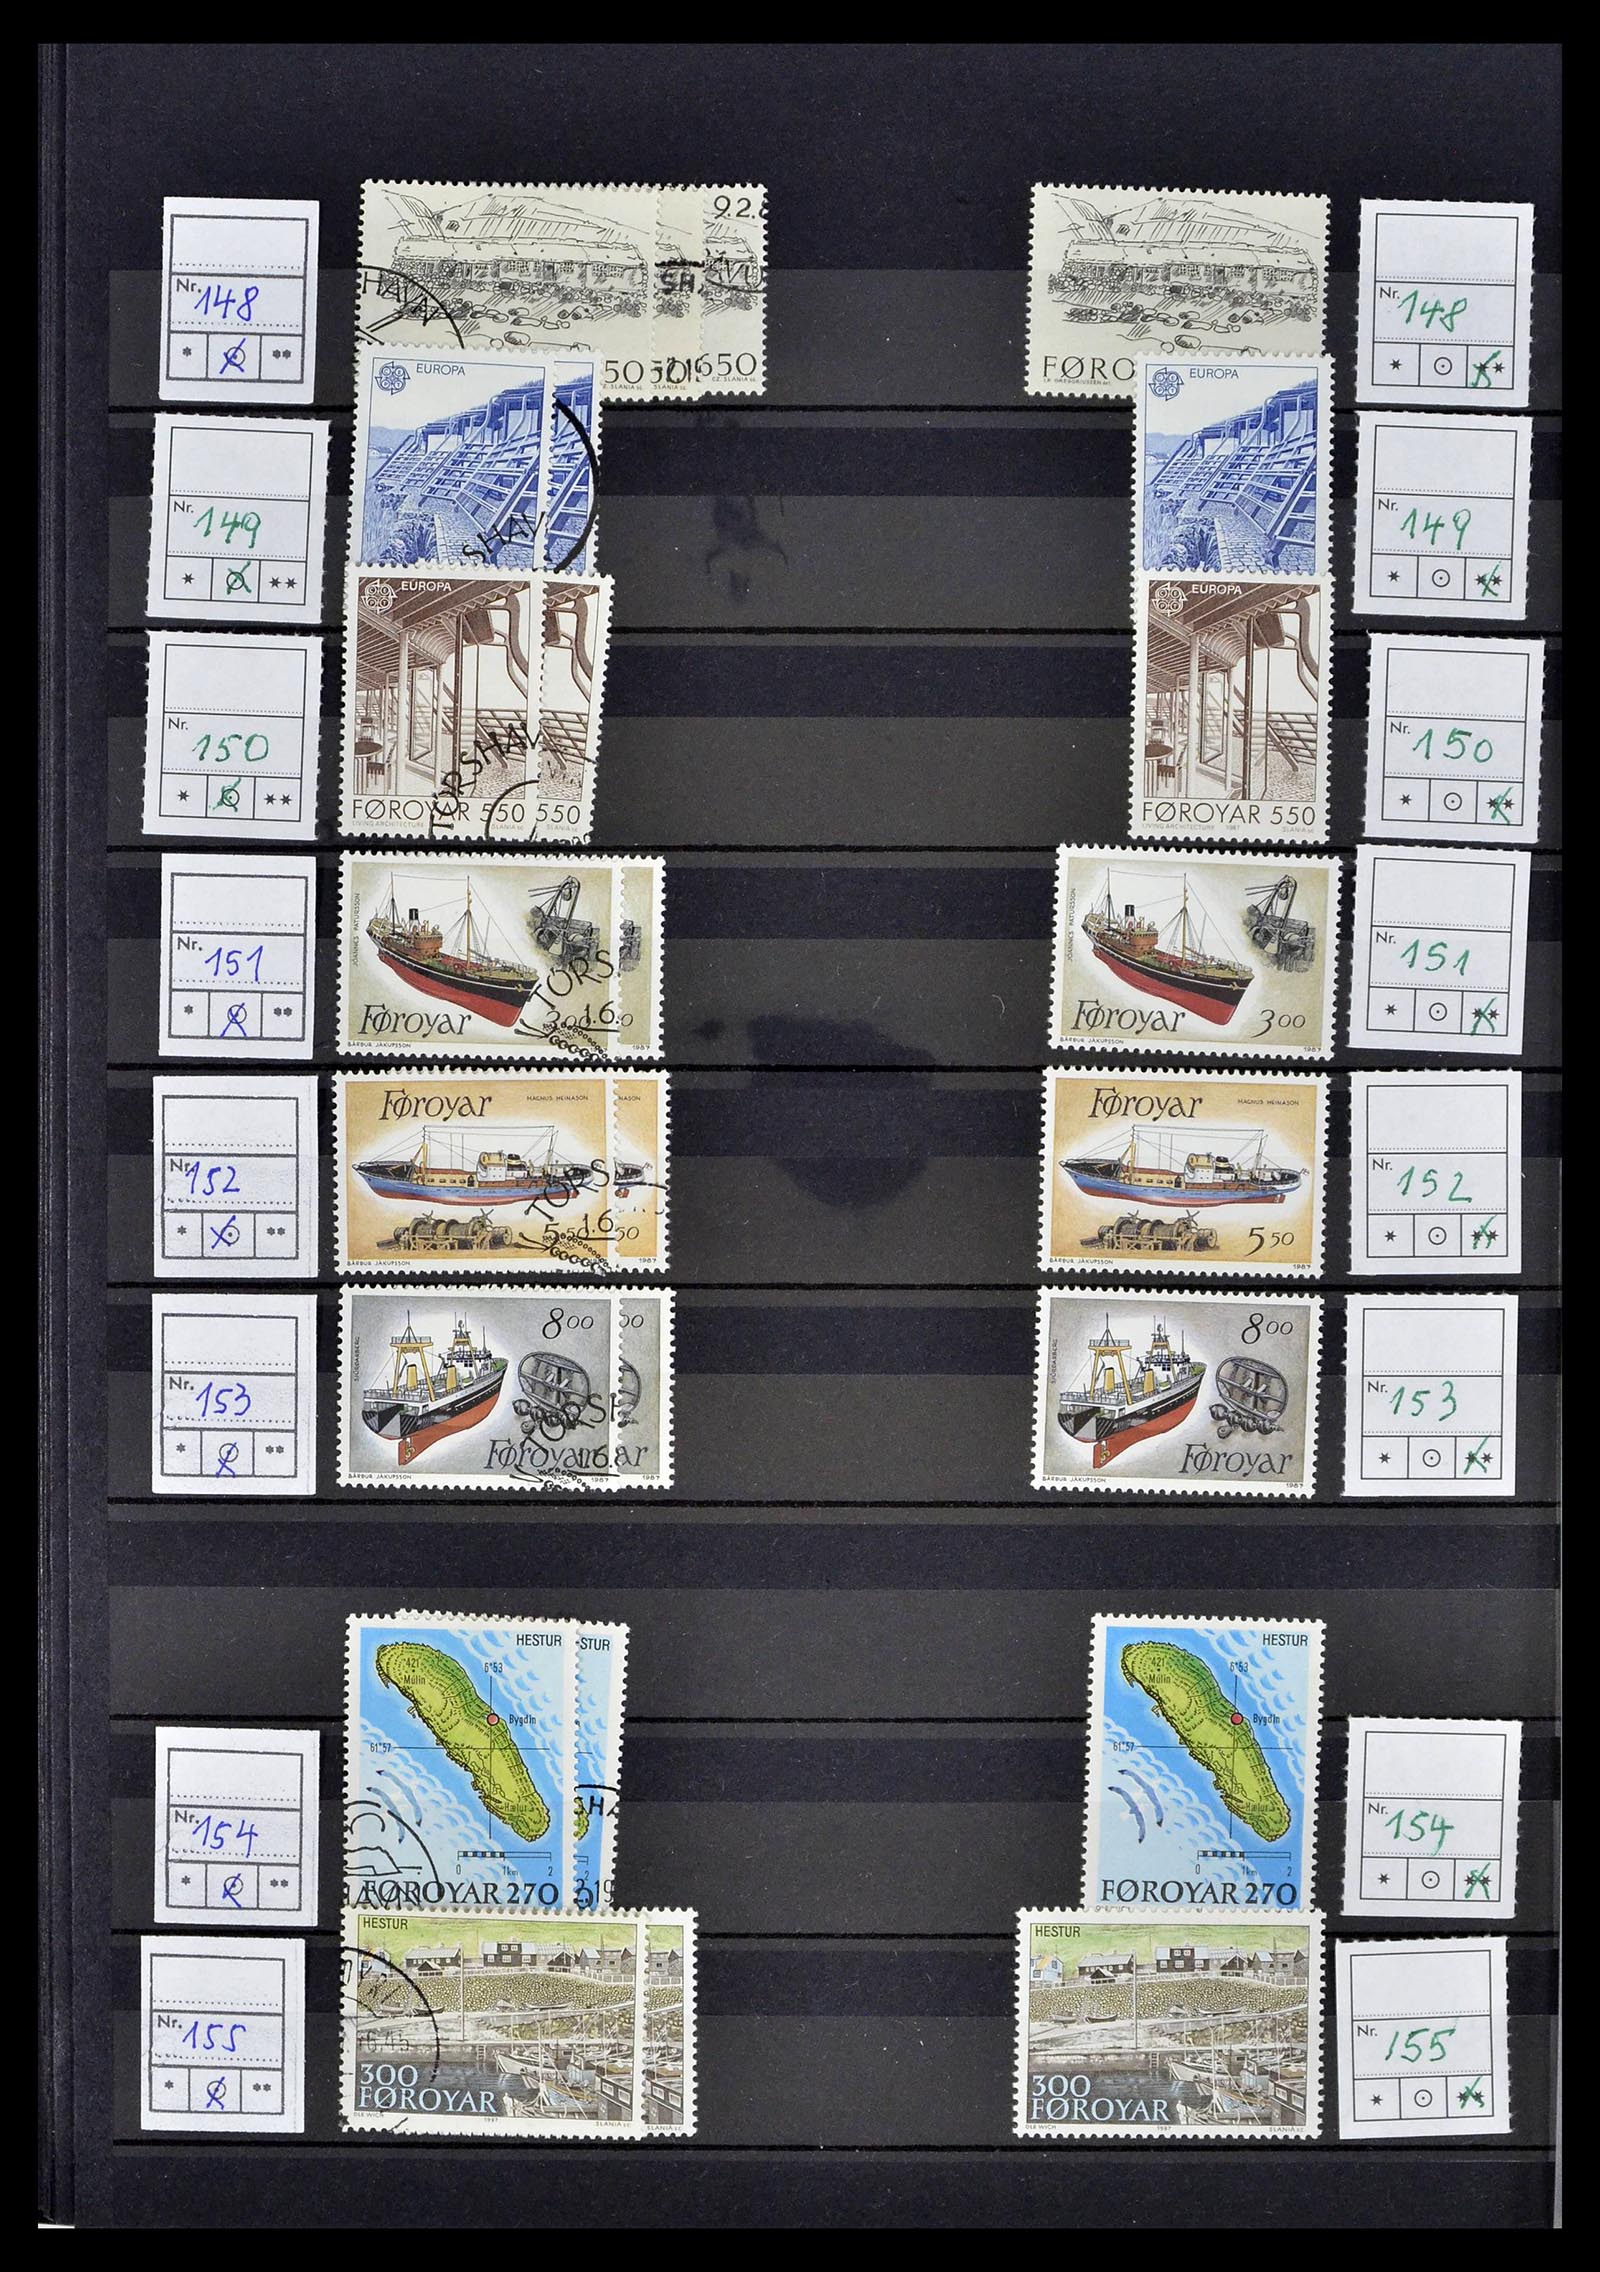 39386 0018 - Stamp collection 39386 Faroe Islands 1941-2010.